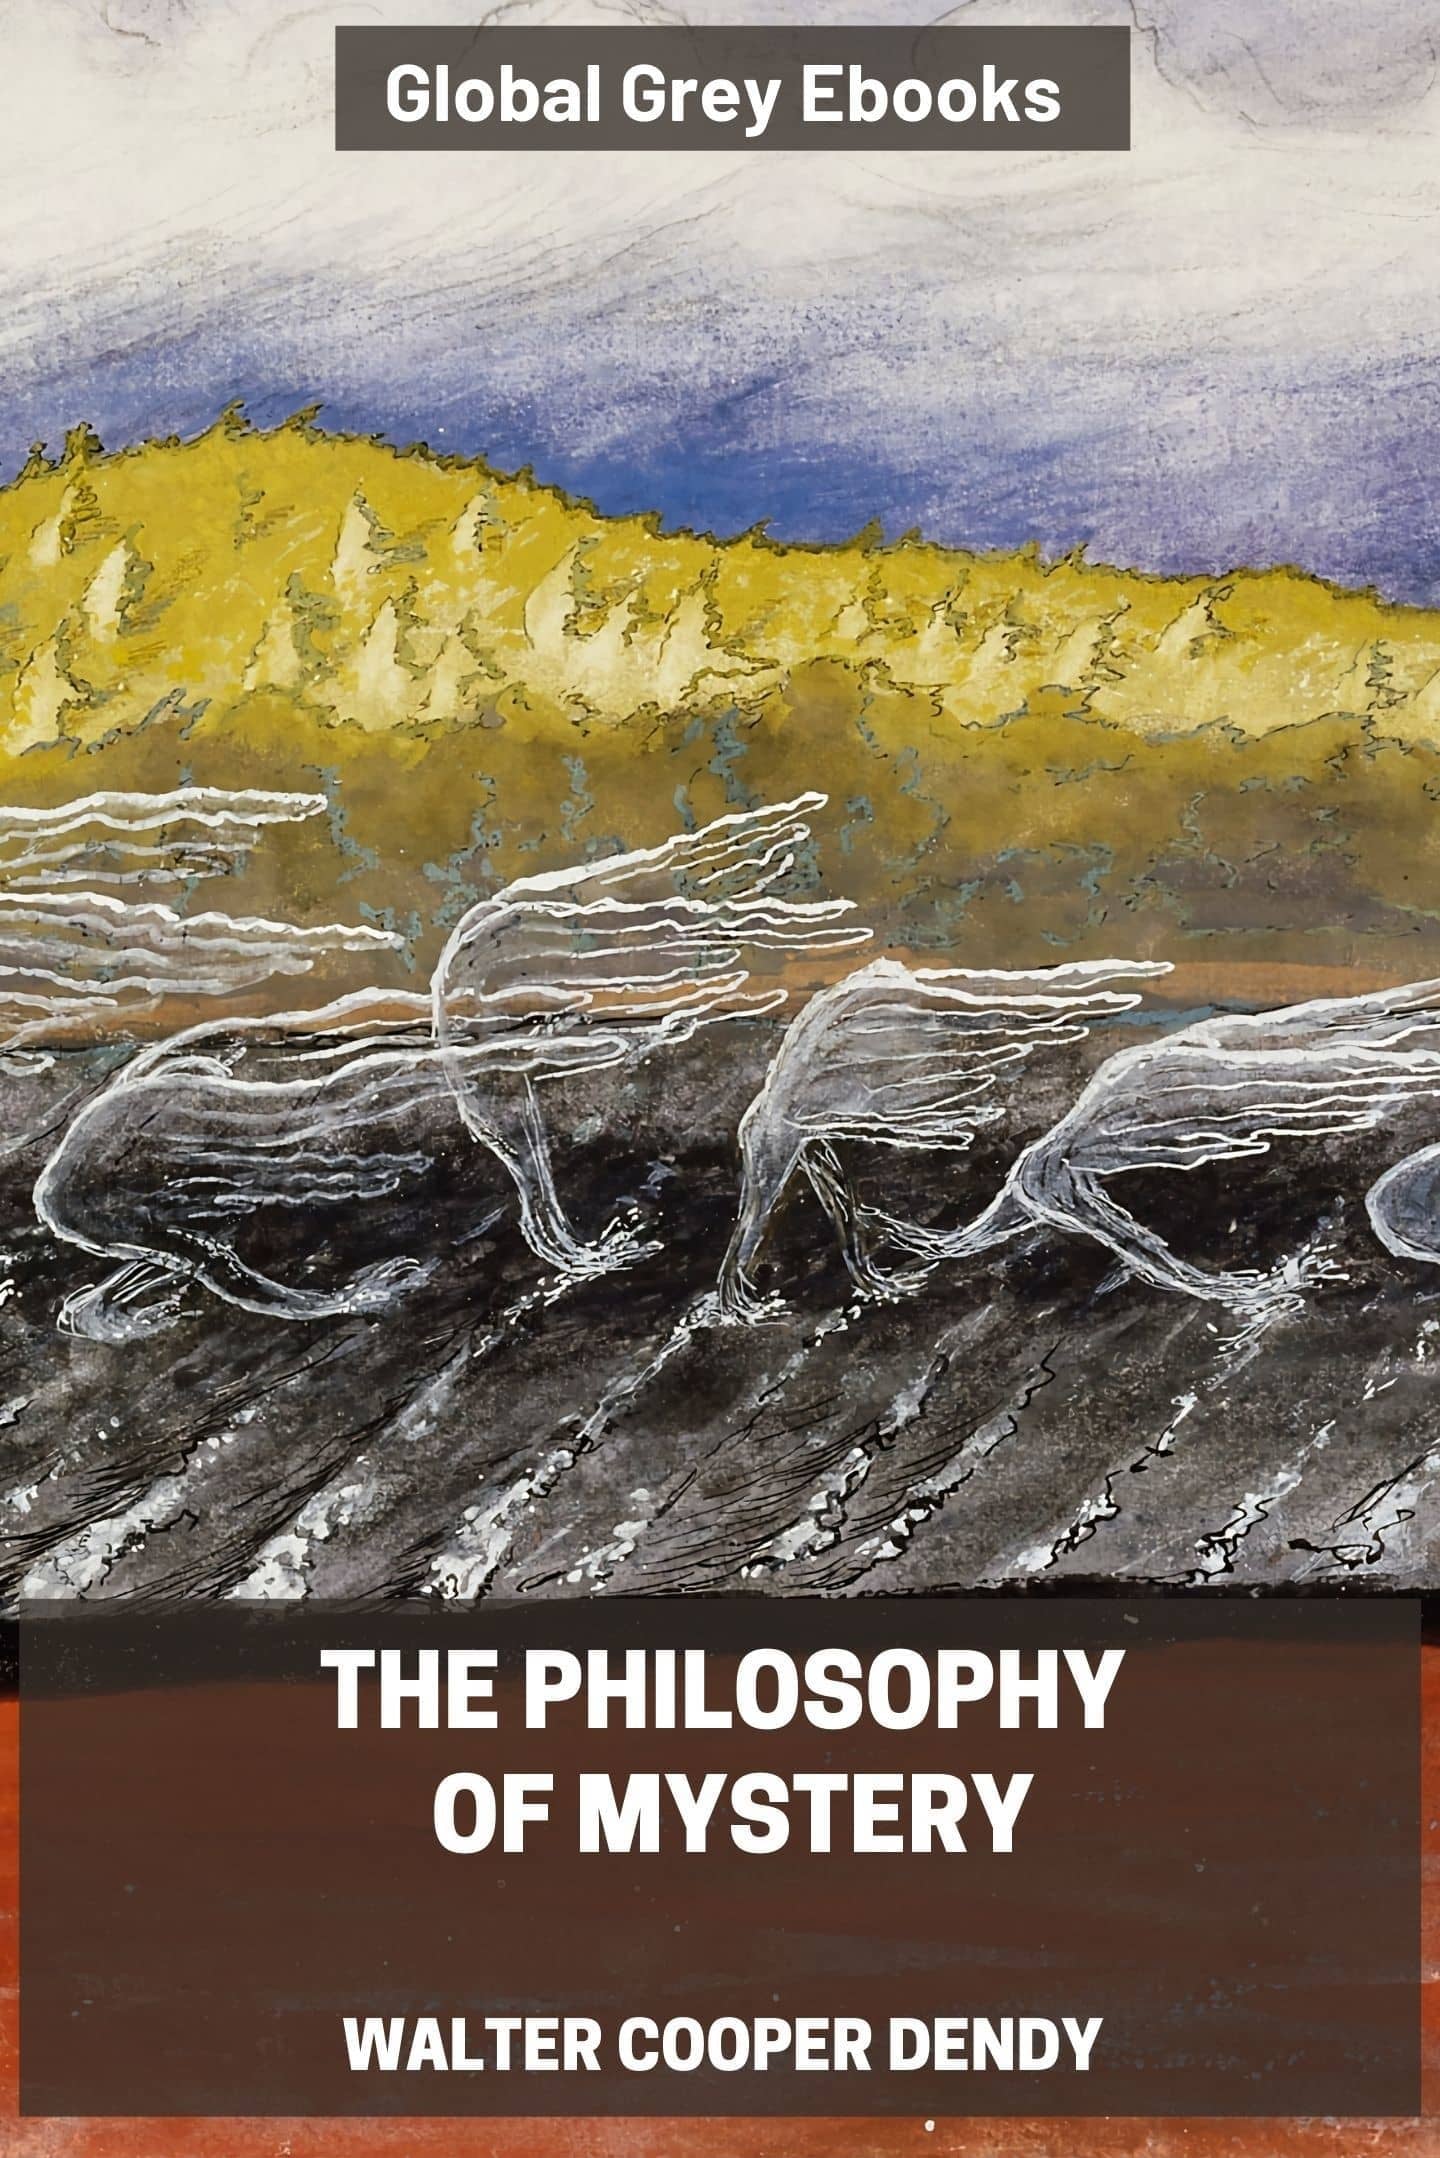 The Philosophy of Mystery by Walter Cooper Dendy - Complete text online -  Global Grey ebooks